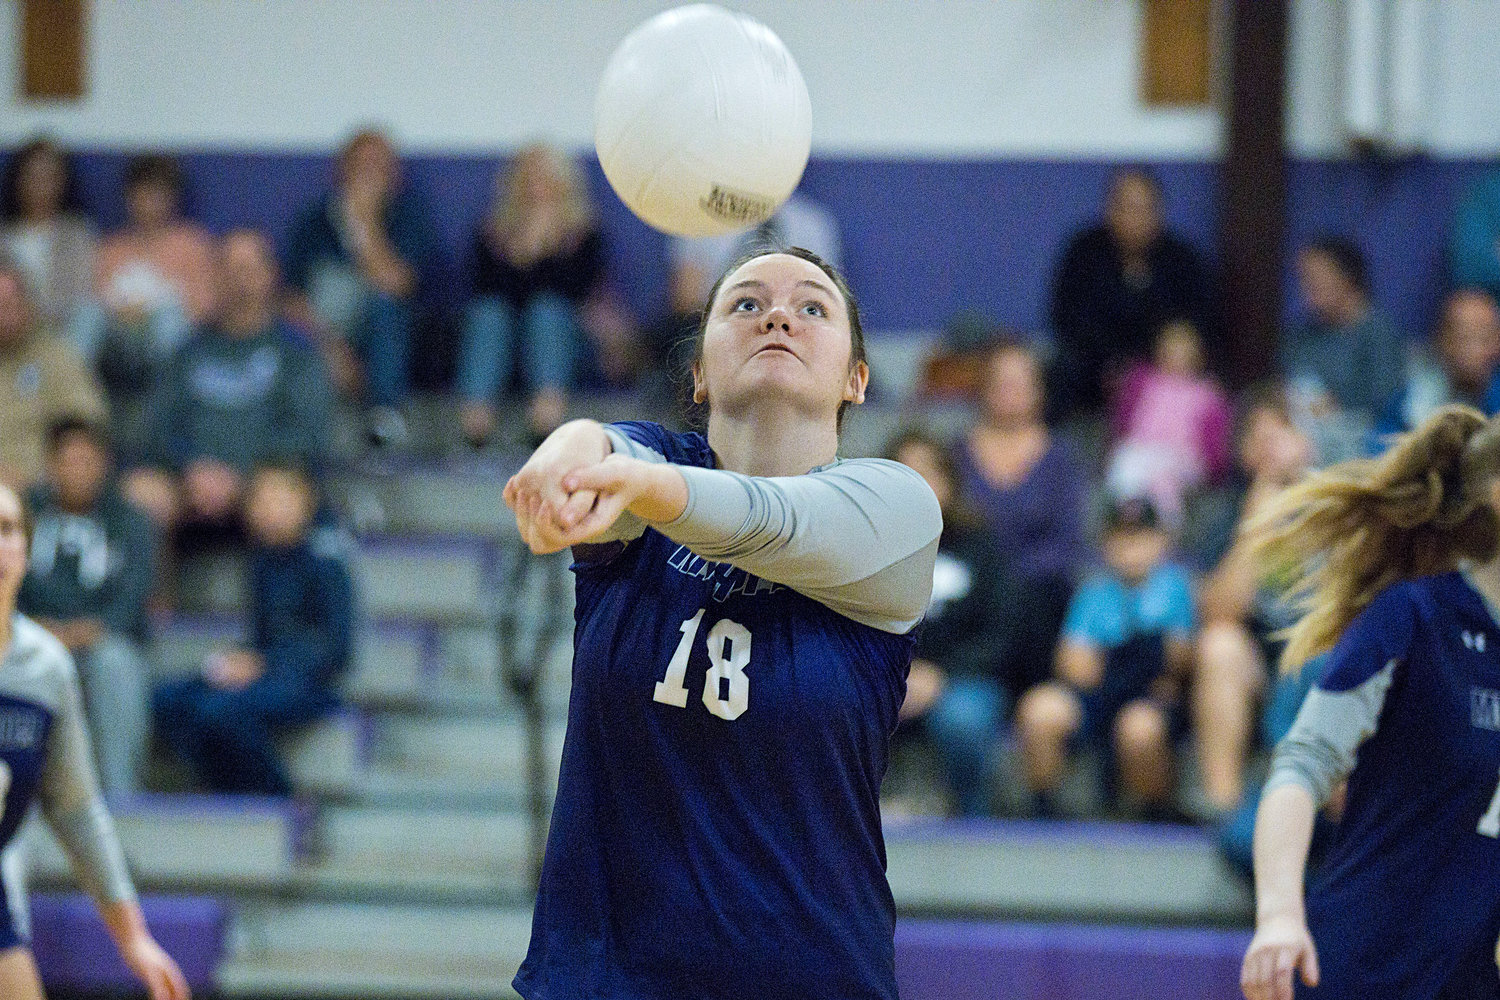 Mary Gerhard gets under the ball to keep it in play during the Preliminary game against Lincoln, Tuesday.